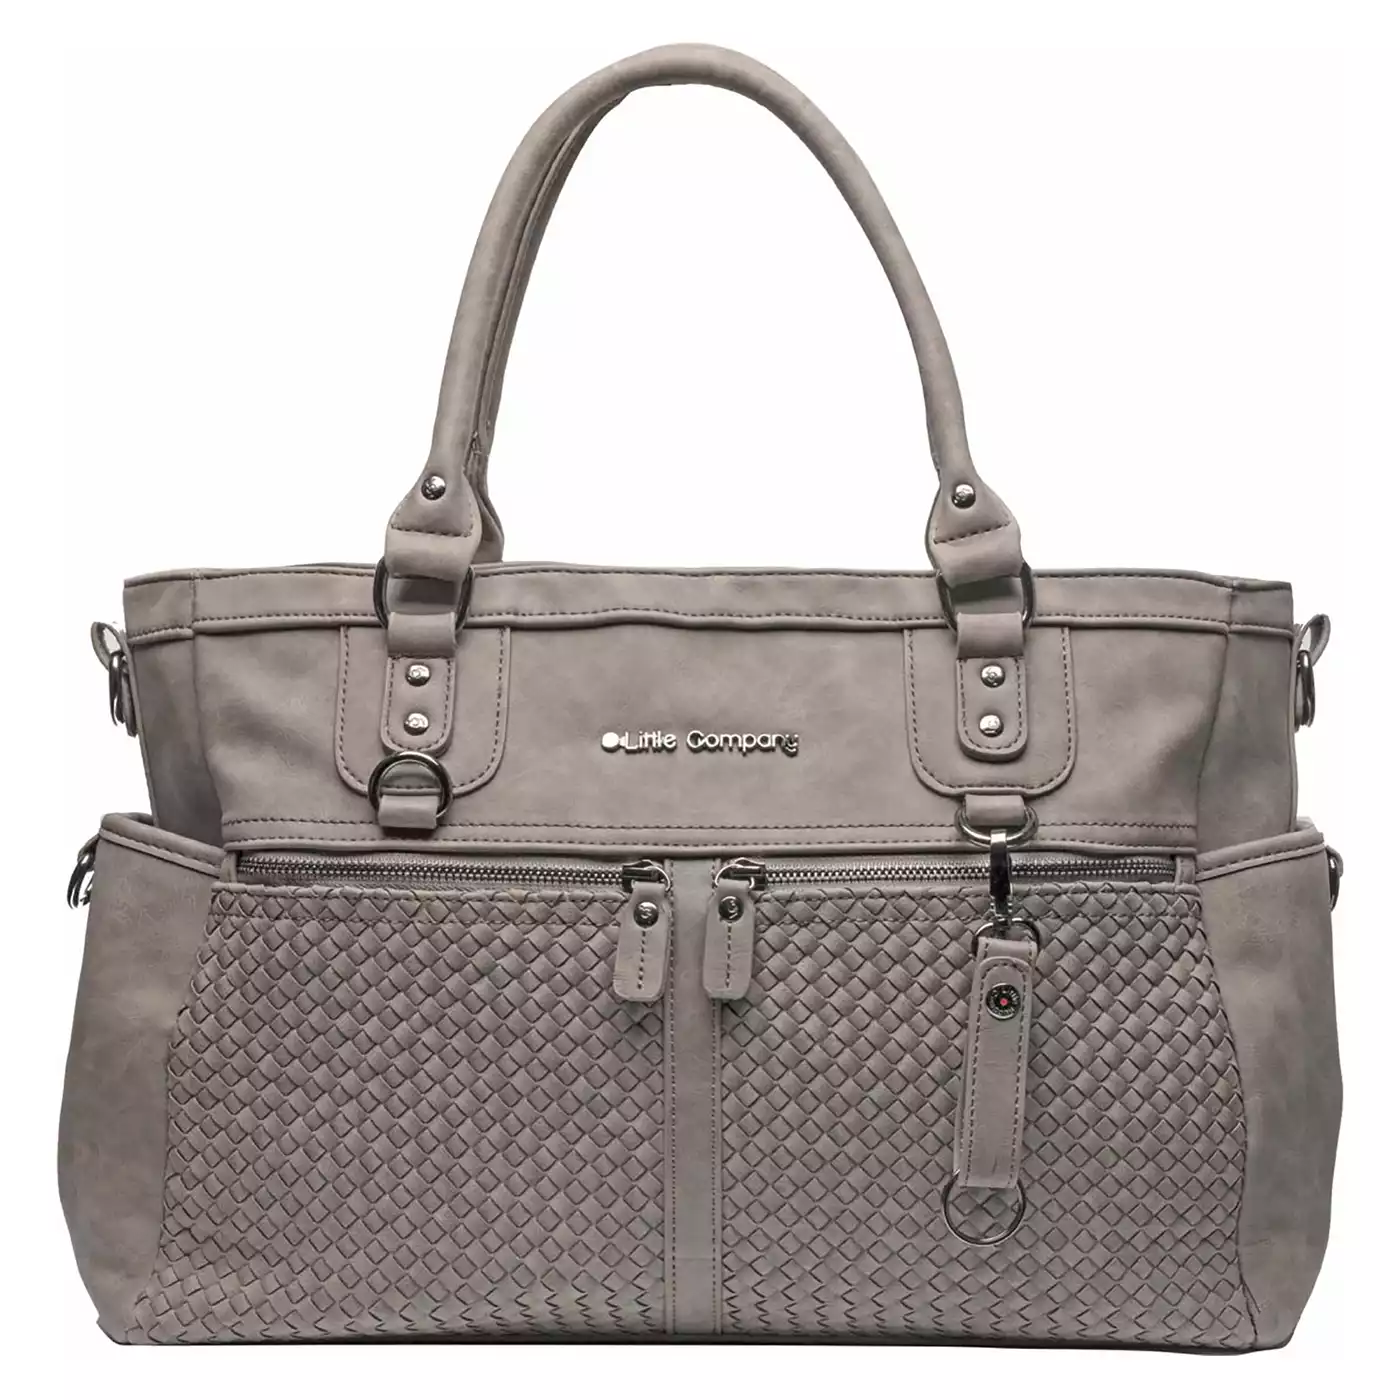 Wickeltasche Monaco Braided taupe Little Company Grau Taupe 2000576181262 1